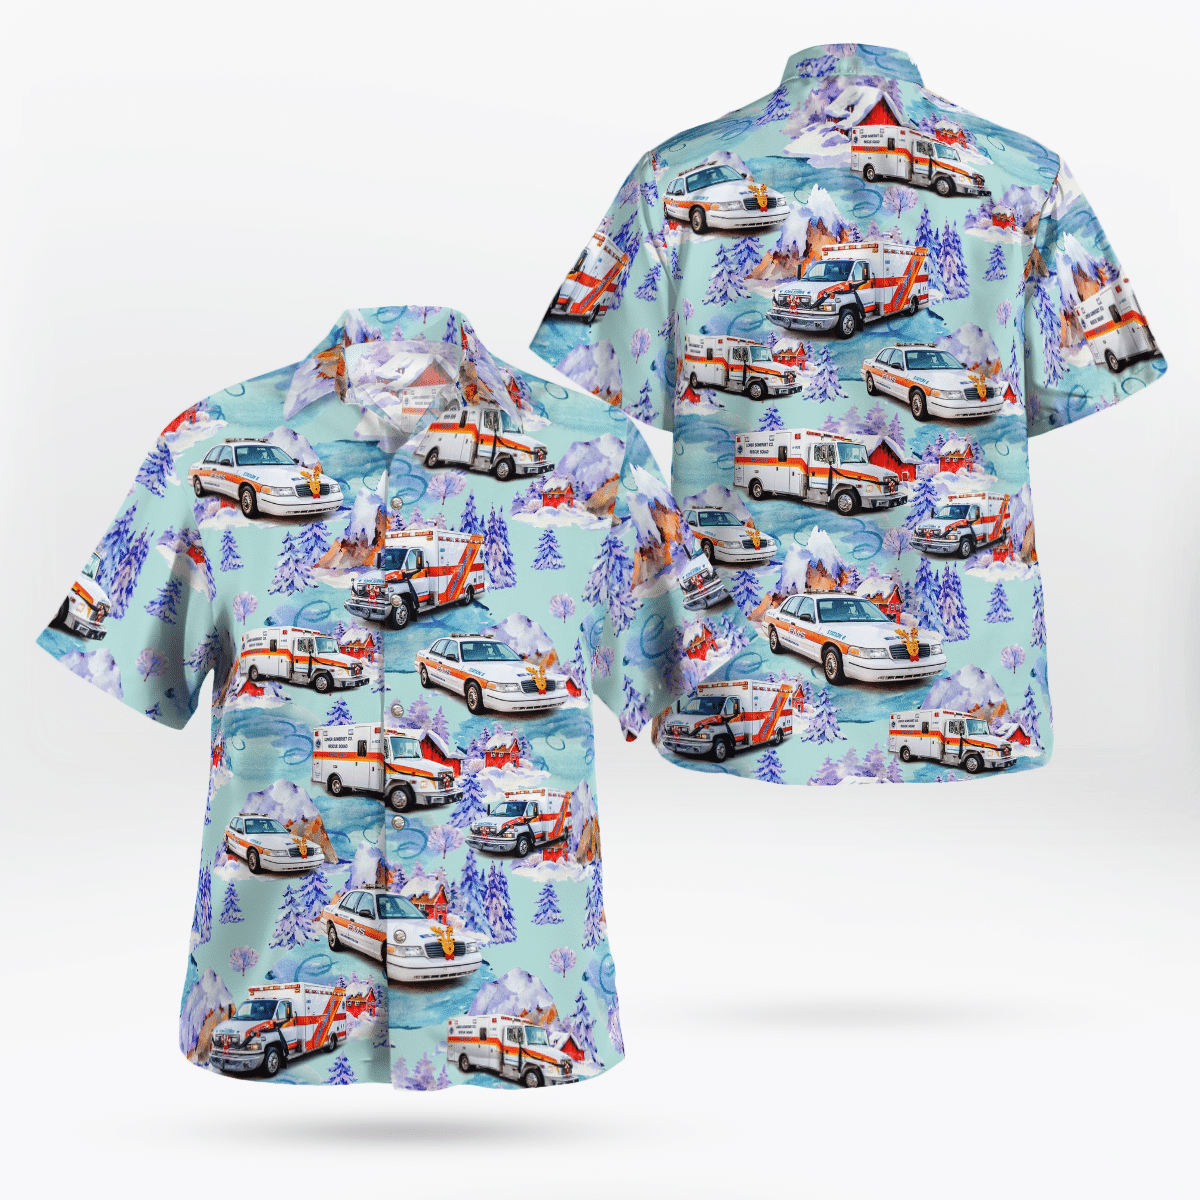 If you want to be noticed, wear These Trendy Hawaiian Shirt 70